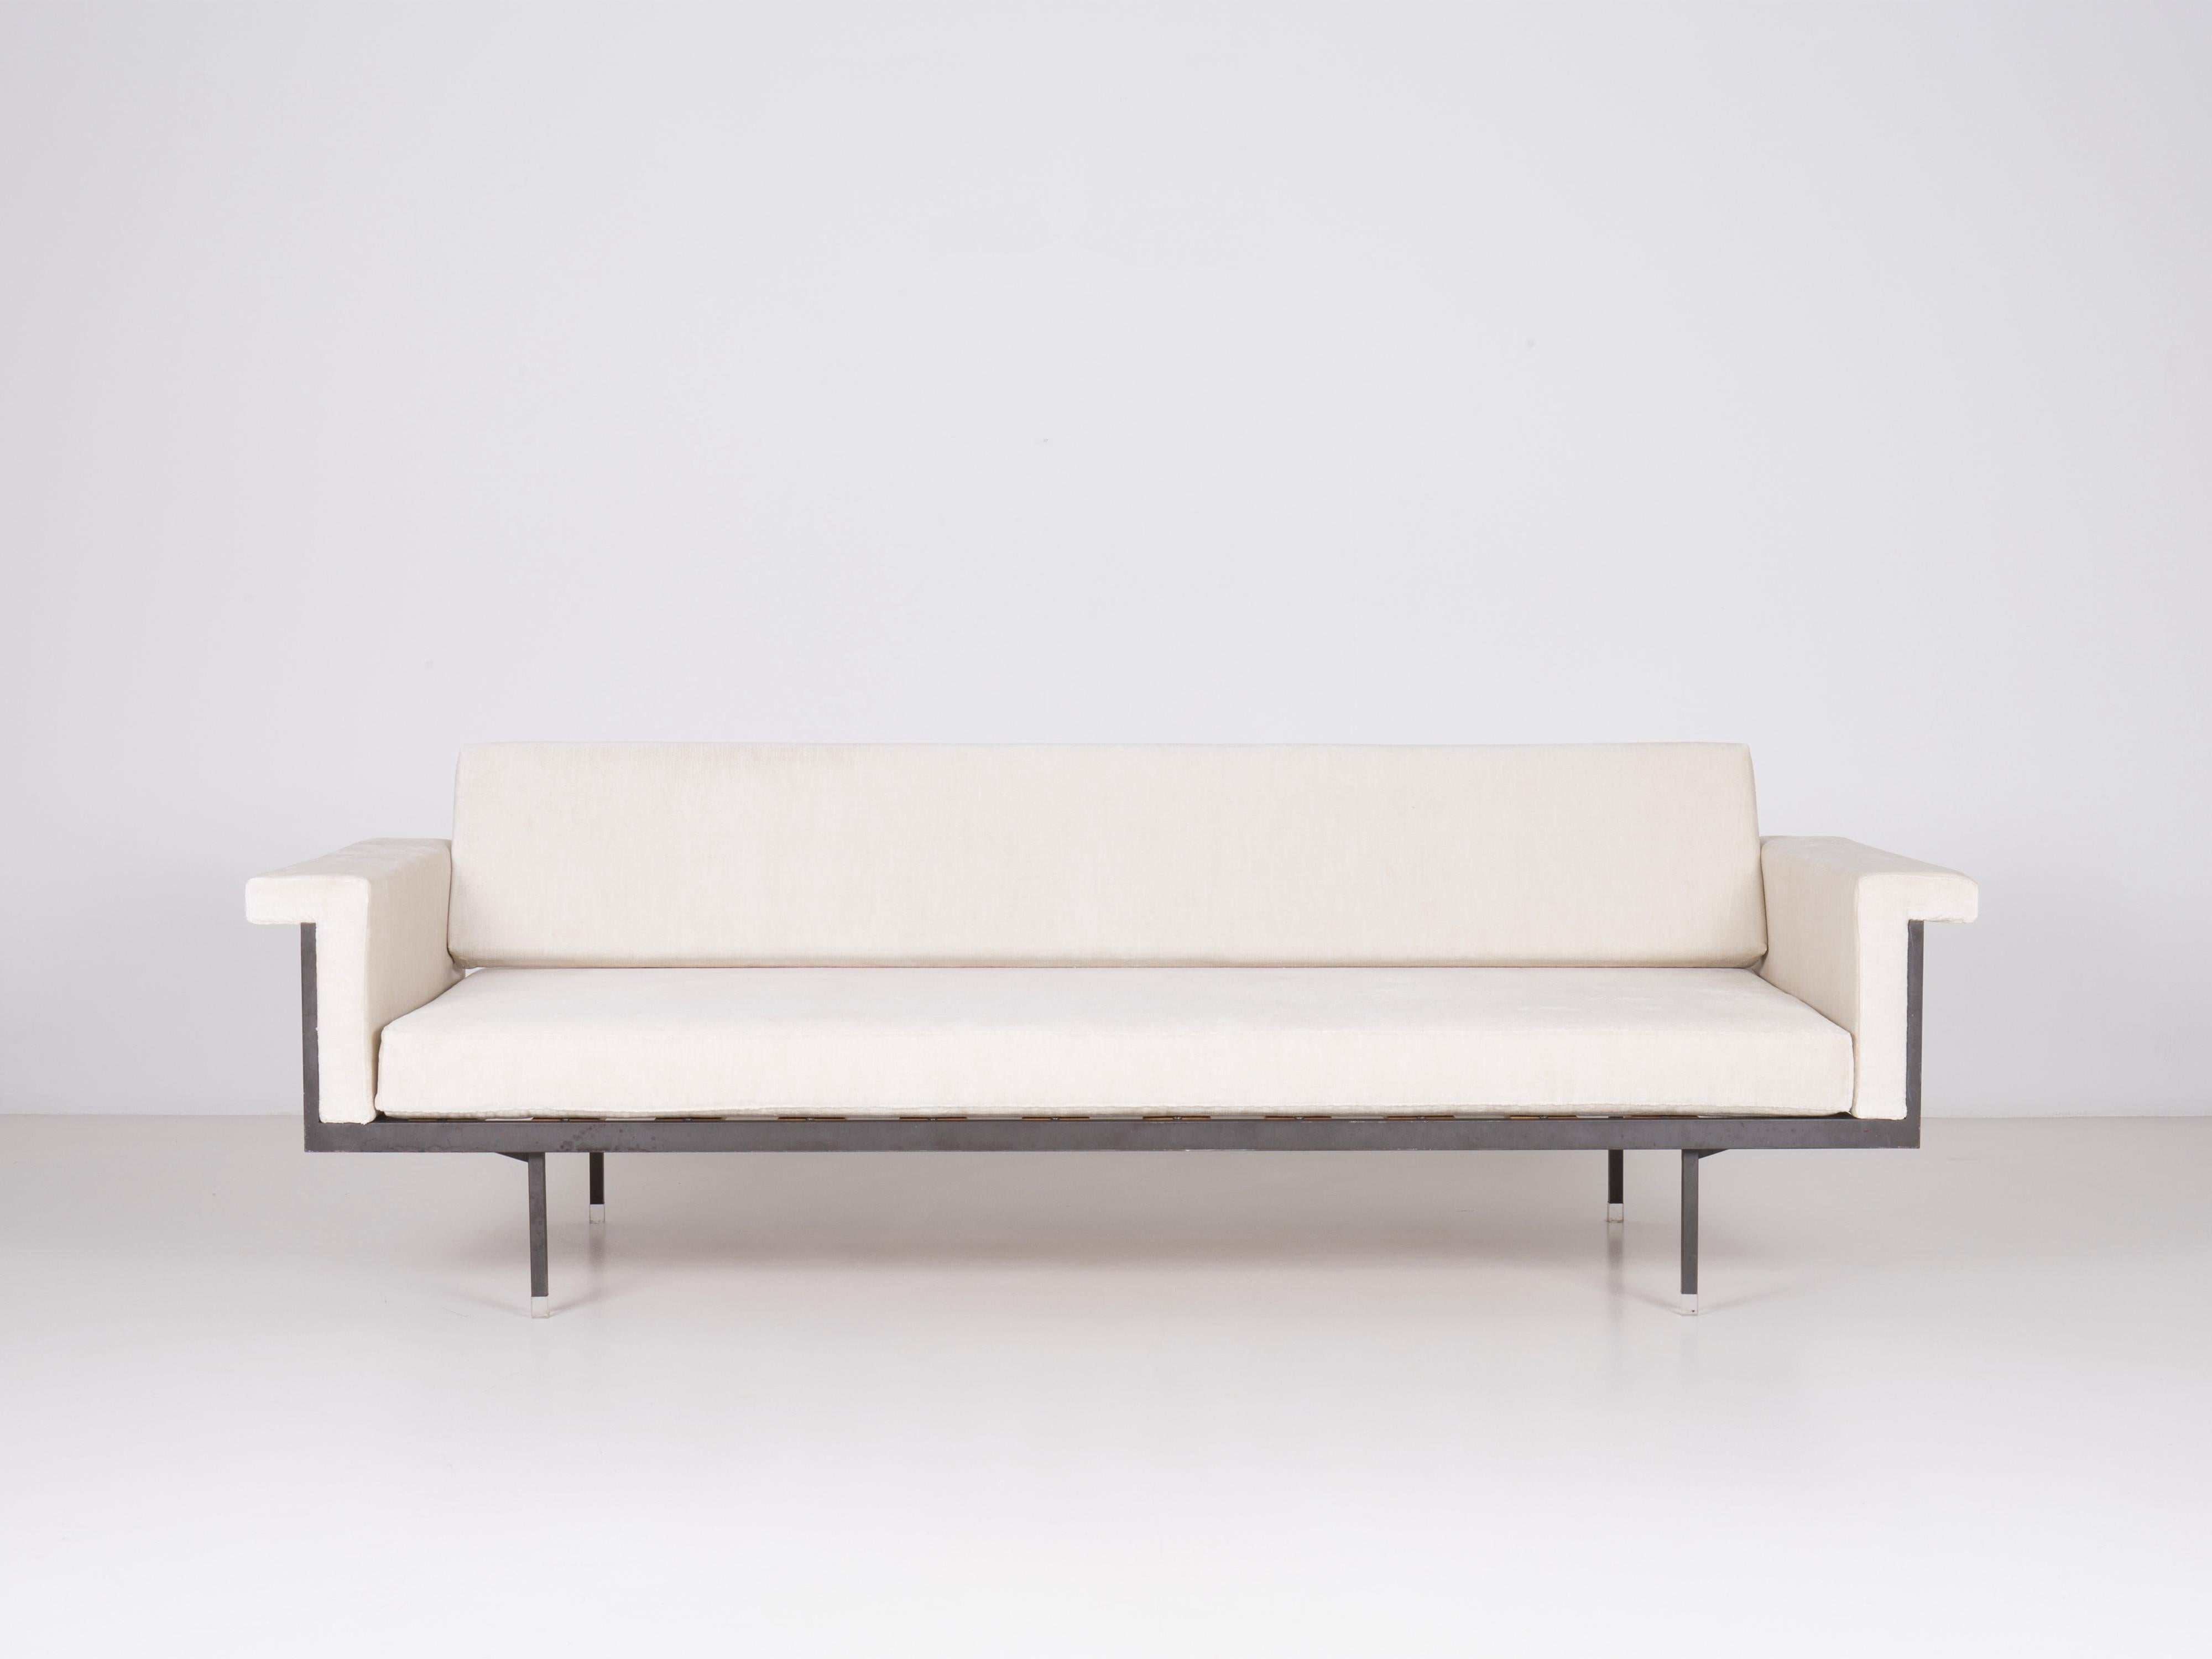 Naeko sofa (daily bed) by Kazuhide Takahama, first model manufactured by Gavina, recently covered in linen velvet. Two pieces available. Supporting structure in metal, polyurethane foam padding, slightly elastic wooden slats, transparent fiberglass